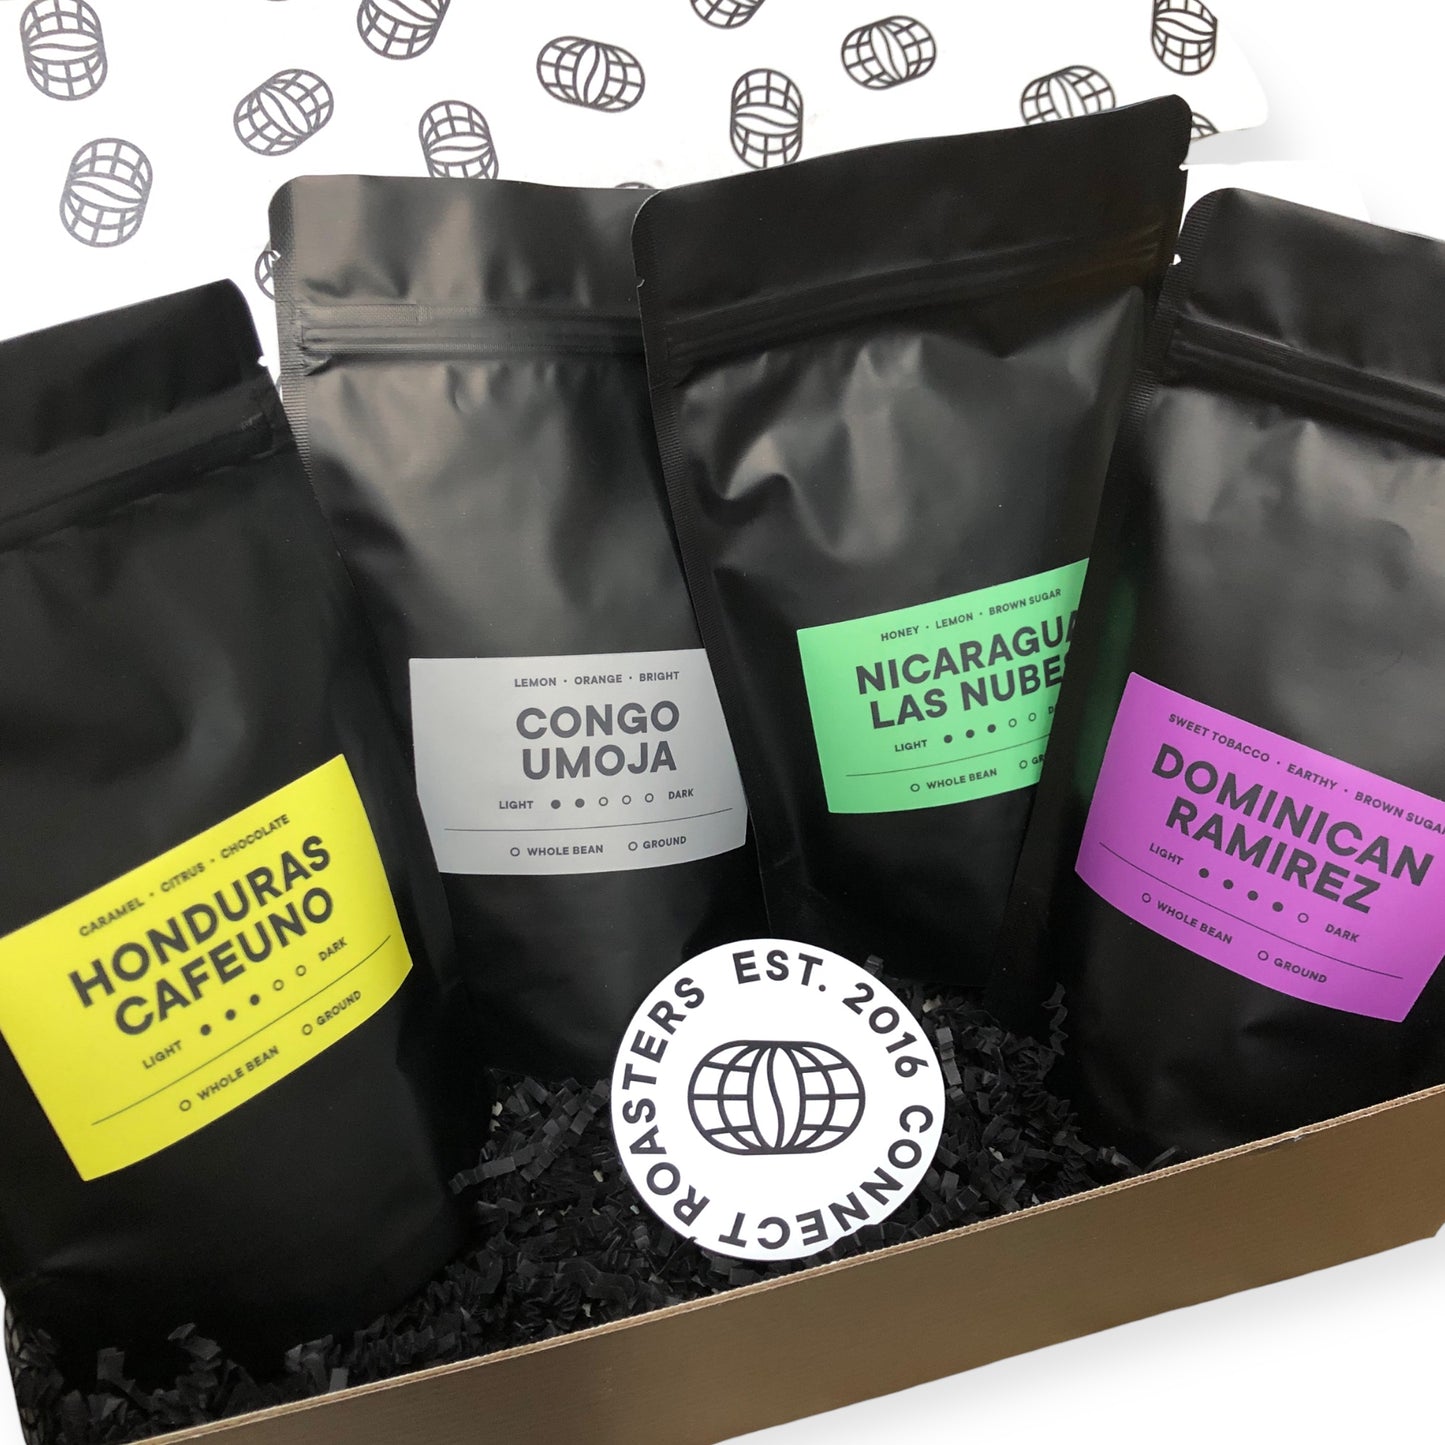 Connect Roasters Coffee Sampler Gift Box